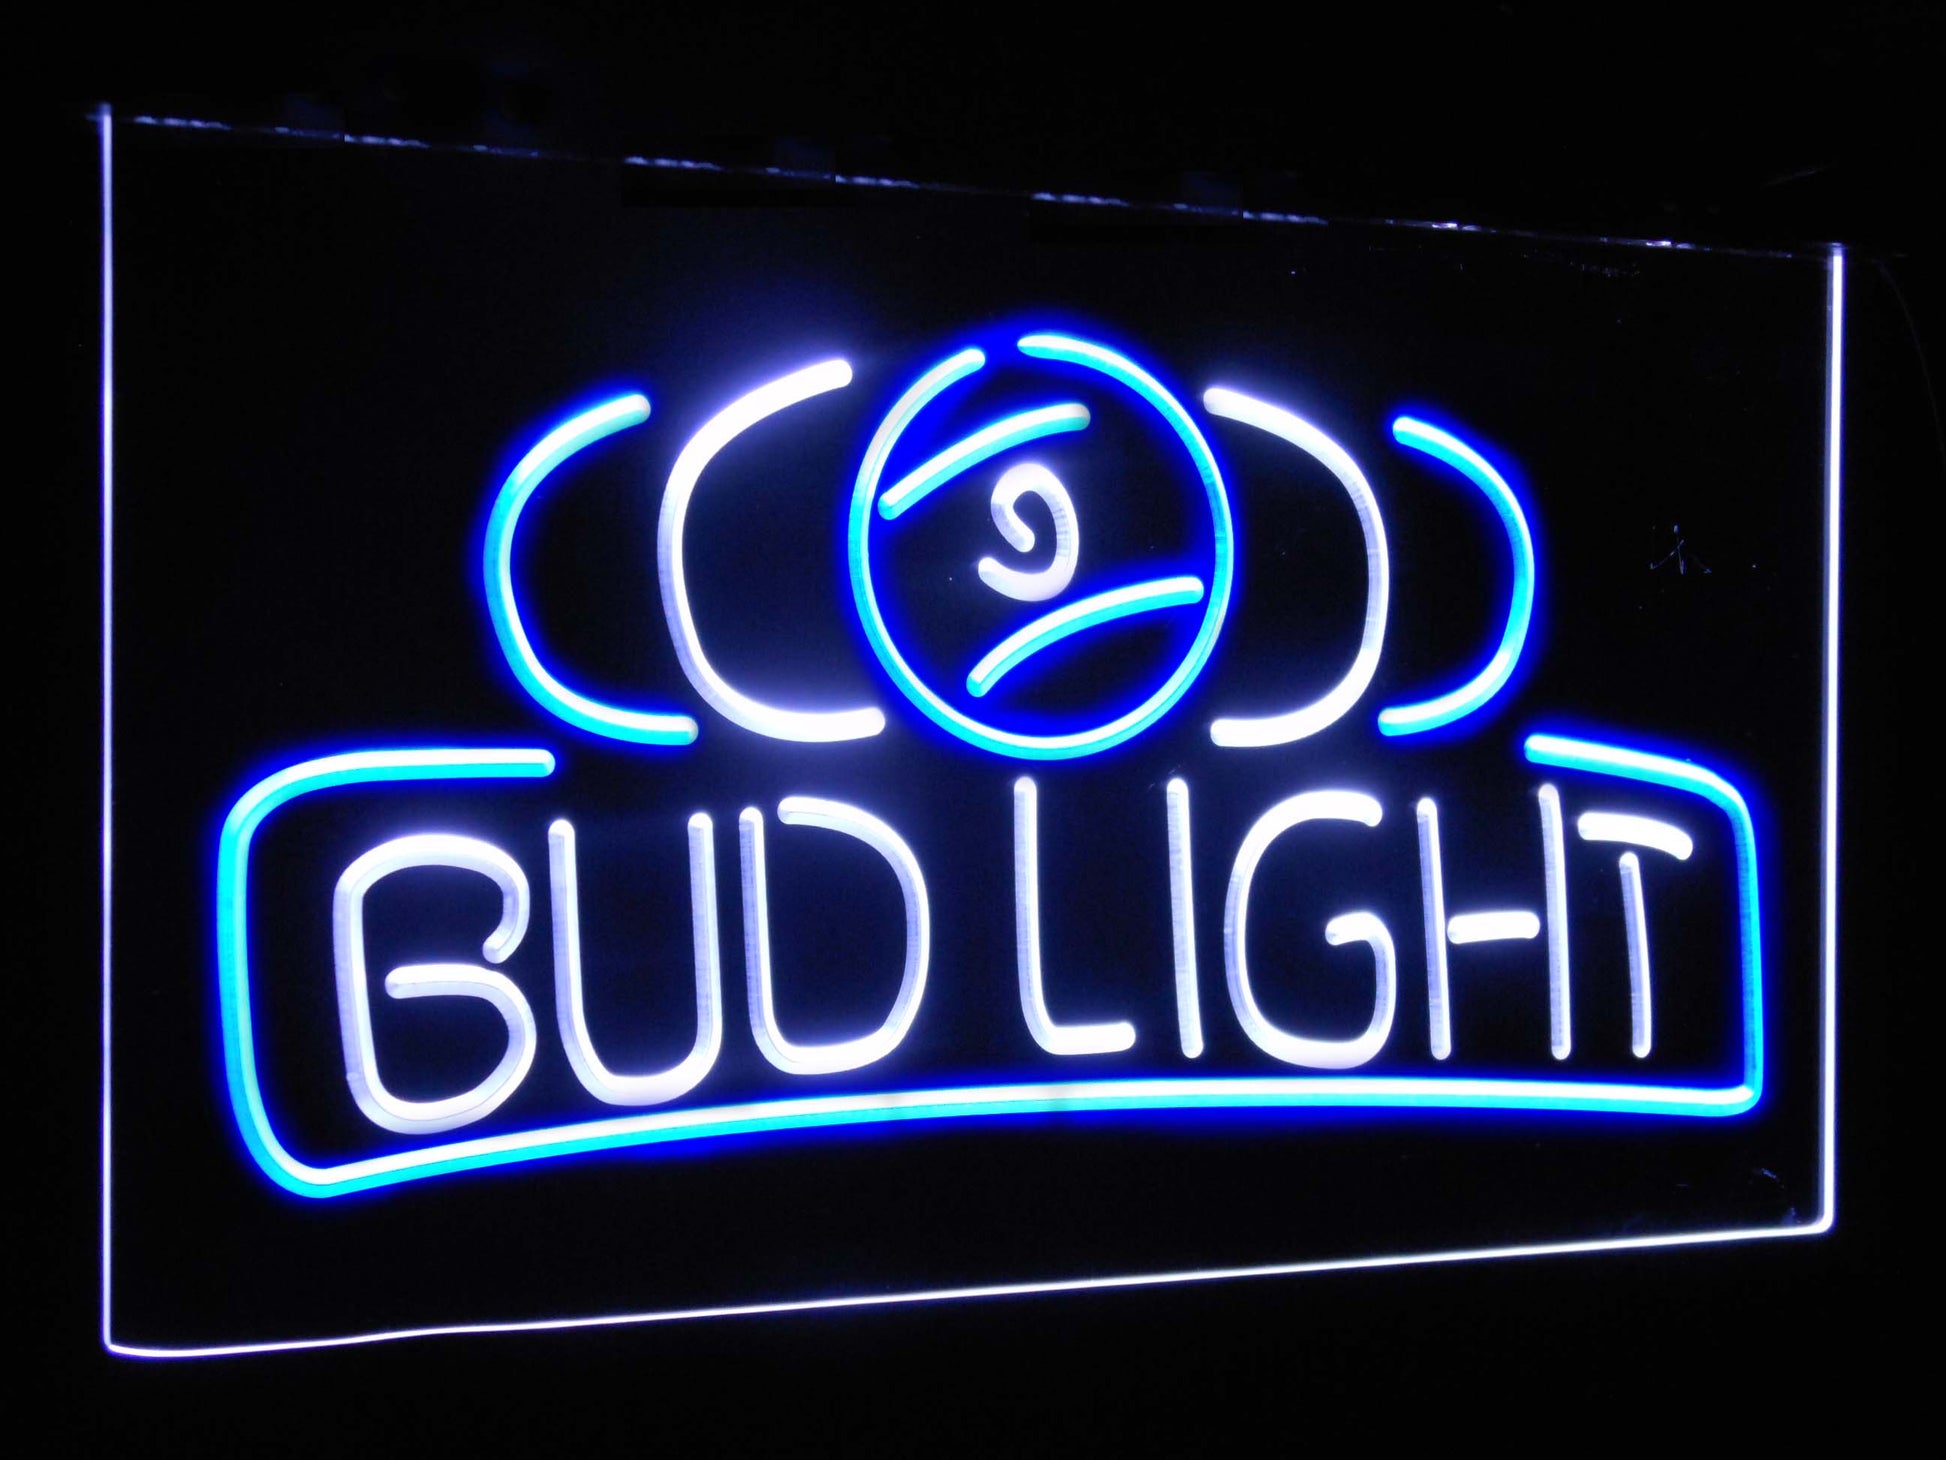 Bud Light Pool Room 9 Ball Snooker Billiard Dual Color Led Neon Light Signs st6-a2056 by Woody Signs Co. - Handmade Crafted Unique Wooden Creative